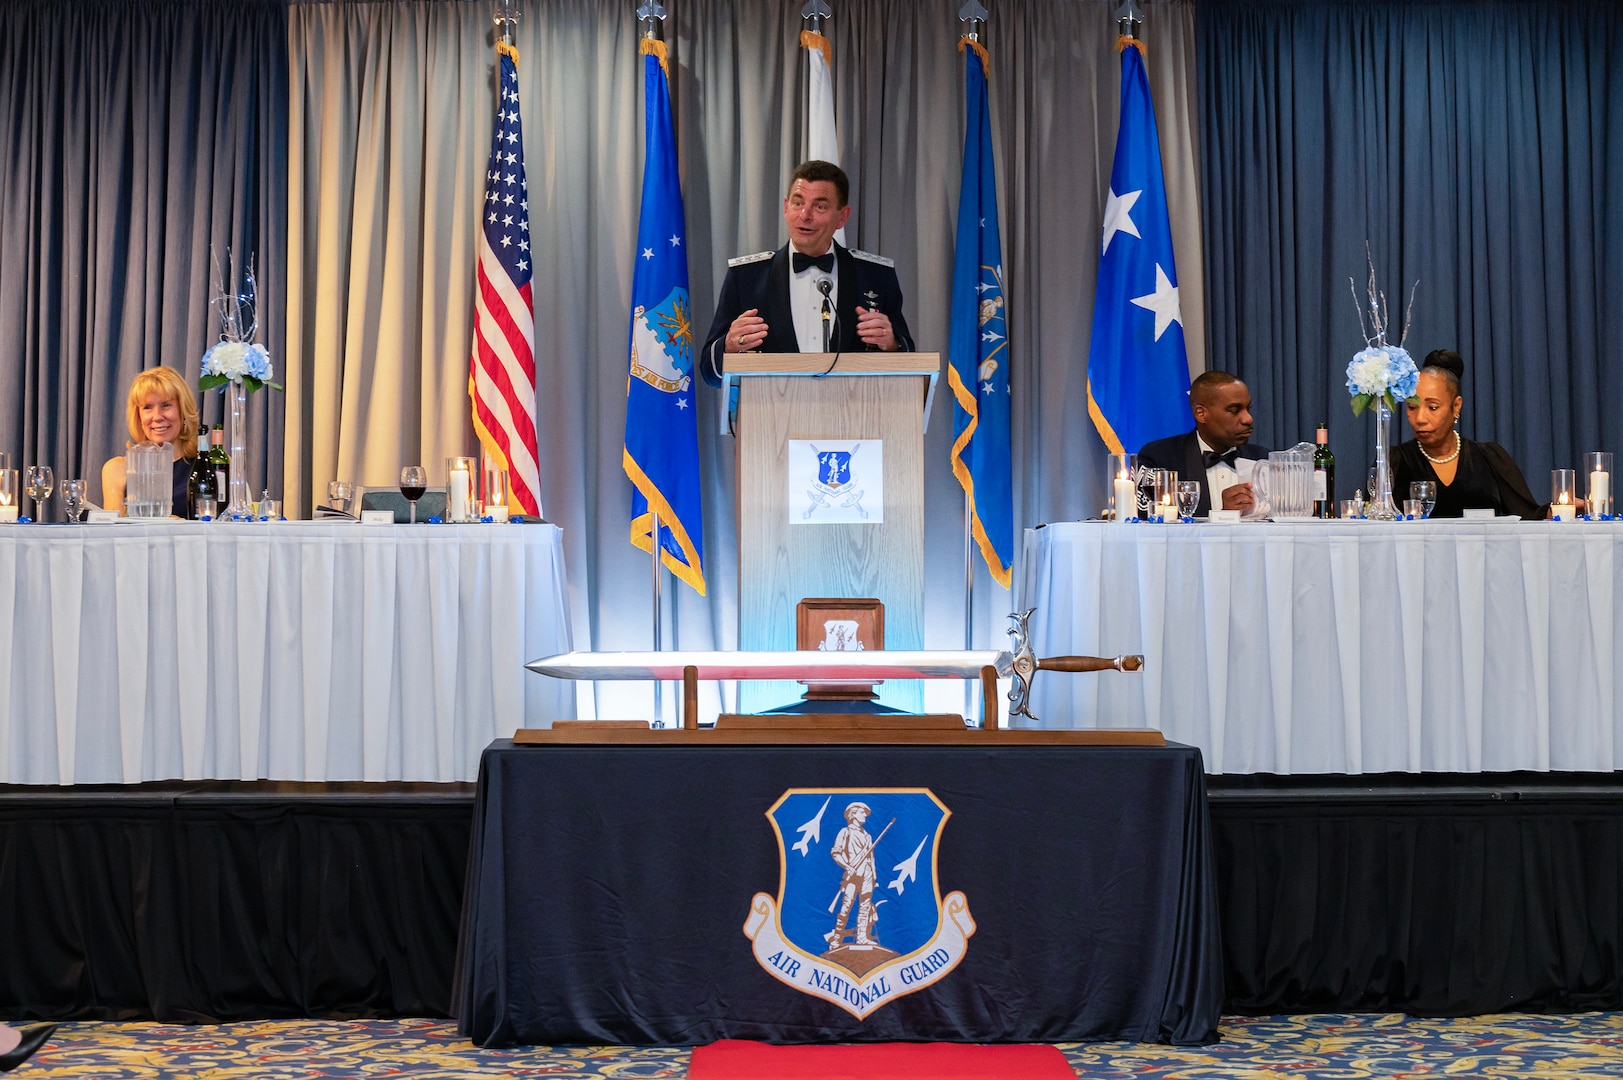 U.S. Air Force Lt. Gen. Michael A. Loh, standing, director, Air National Guard, at his induction ceremony into the Order of the Sword at the U.S. Air Force Academy, Colorado Springs, Colorado, Feb. 15, 2024. Loh was inducted for supporting the development and welfare of Airmen.